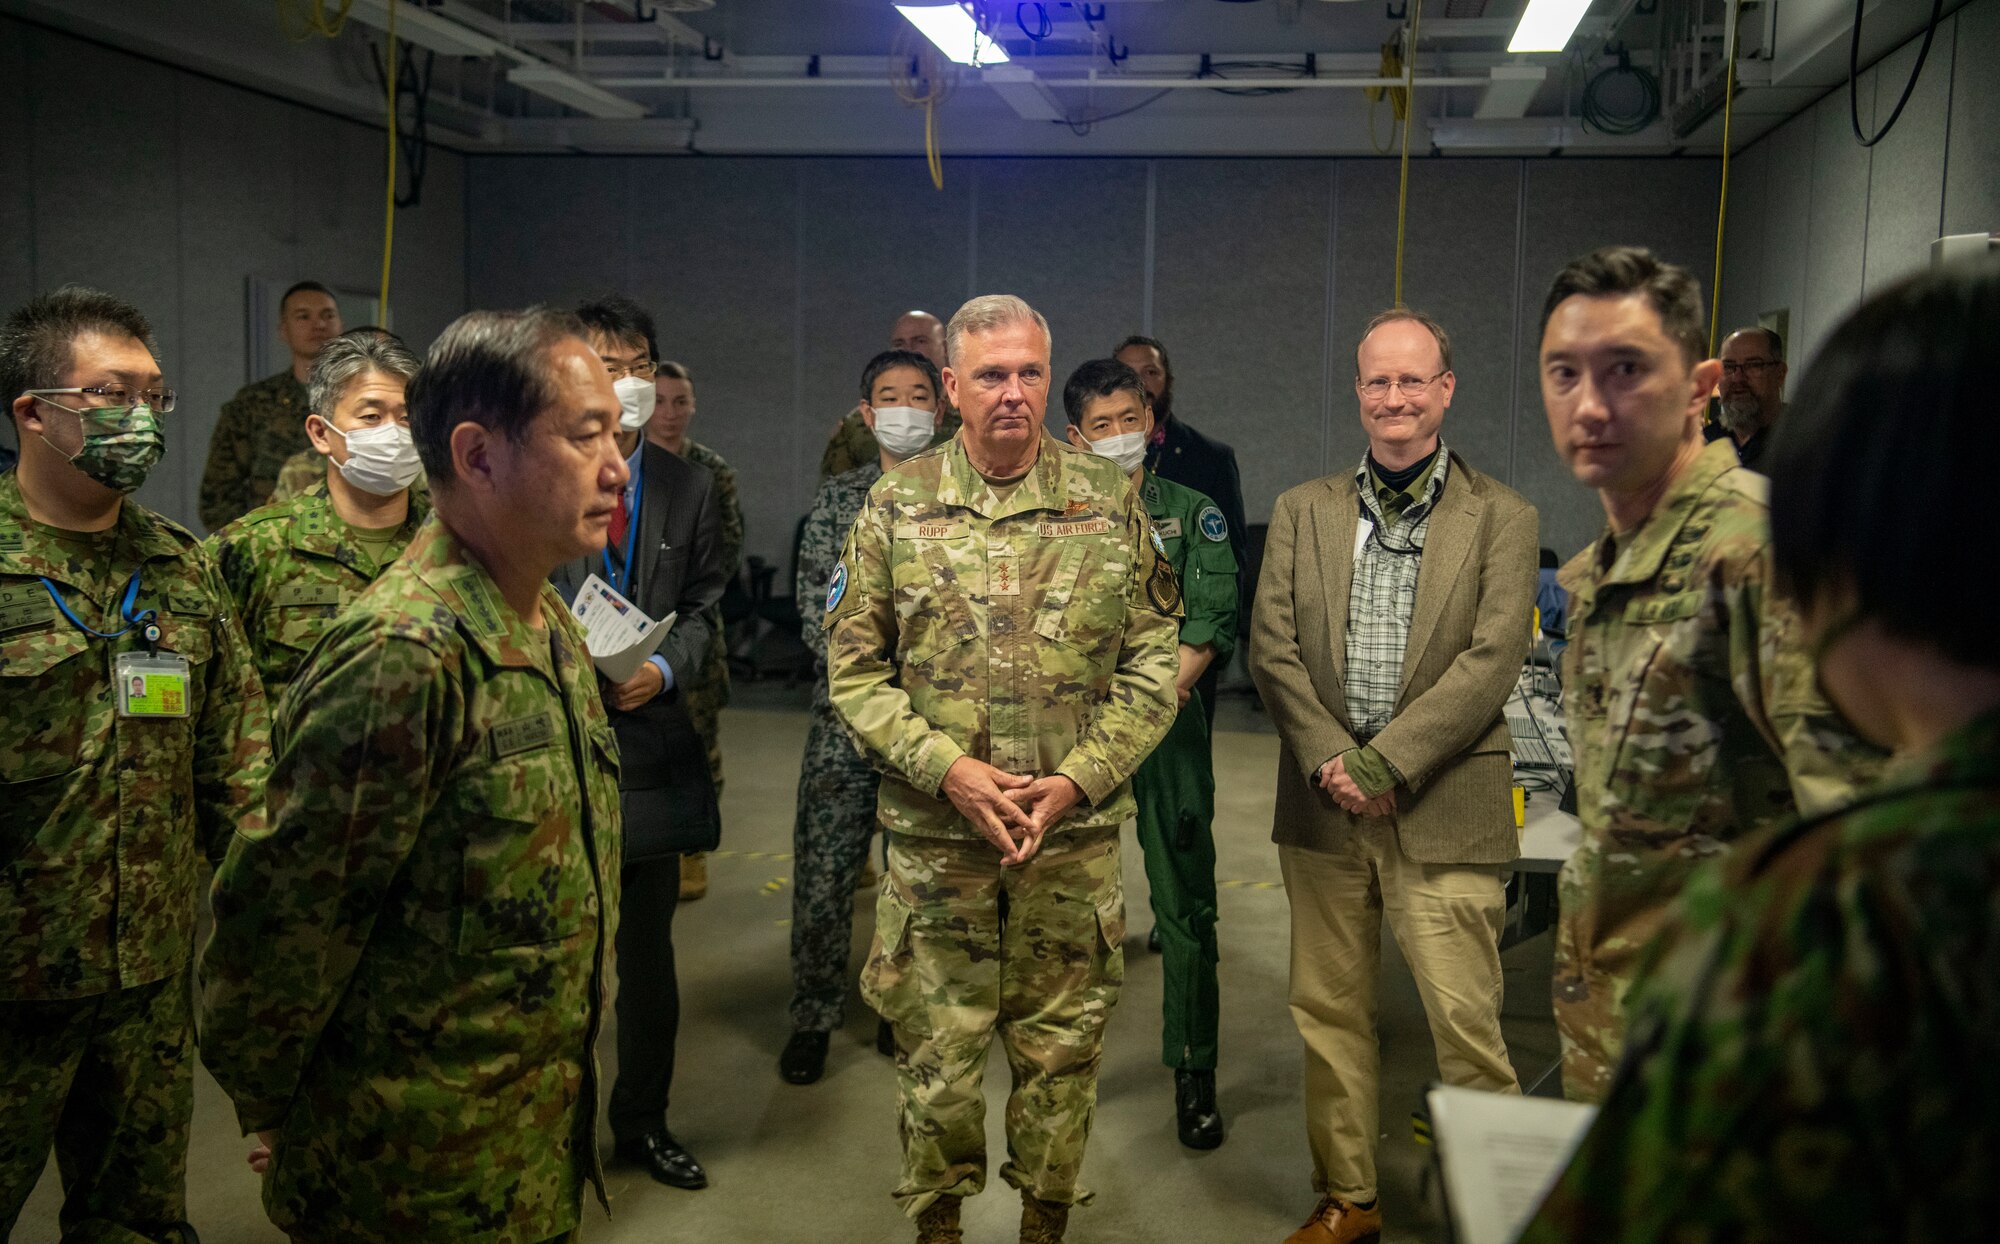 U.S. Air Force Lt. Gen. Ricky Rupp, commander of United States Forces Japan and Fifth Air Force,, and GEN Yamazaki Koji, chief of staff for the Japan Joint Staff, receive a briefing from U.S. Army Pacific and U.S. Army Japan soldiers on cybersecurity readiness during exercise Keen Sword 23 at Sagami Depot, Japan, Nov. 15, 2022.